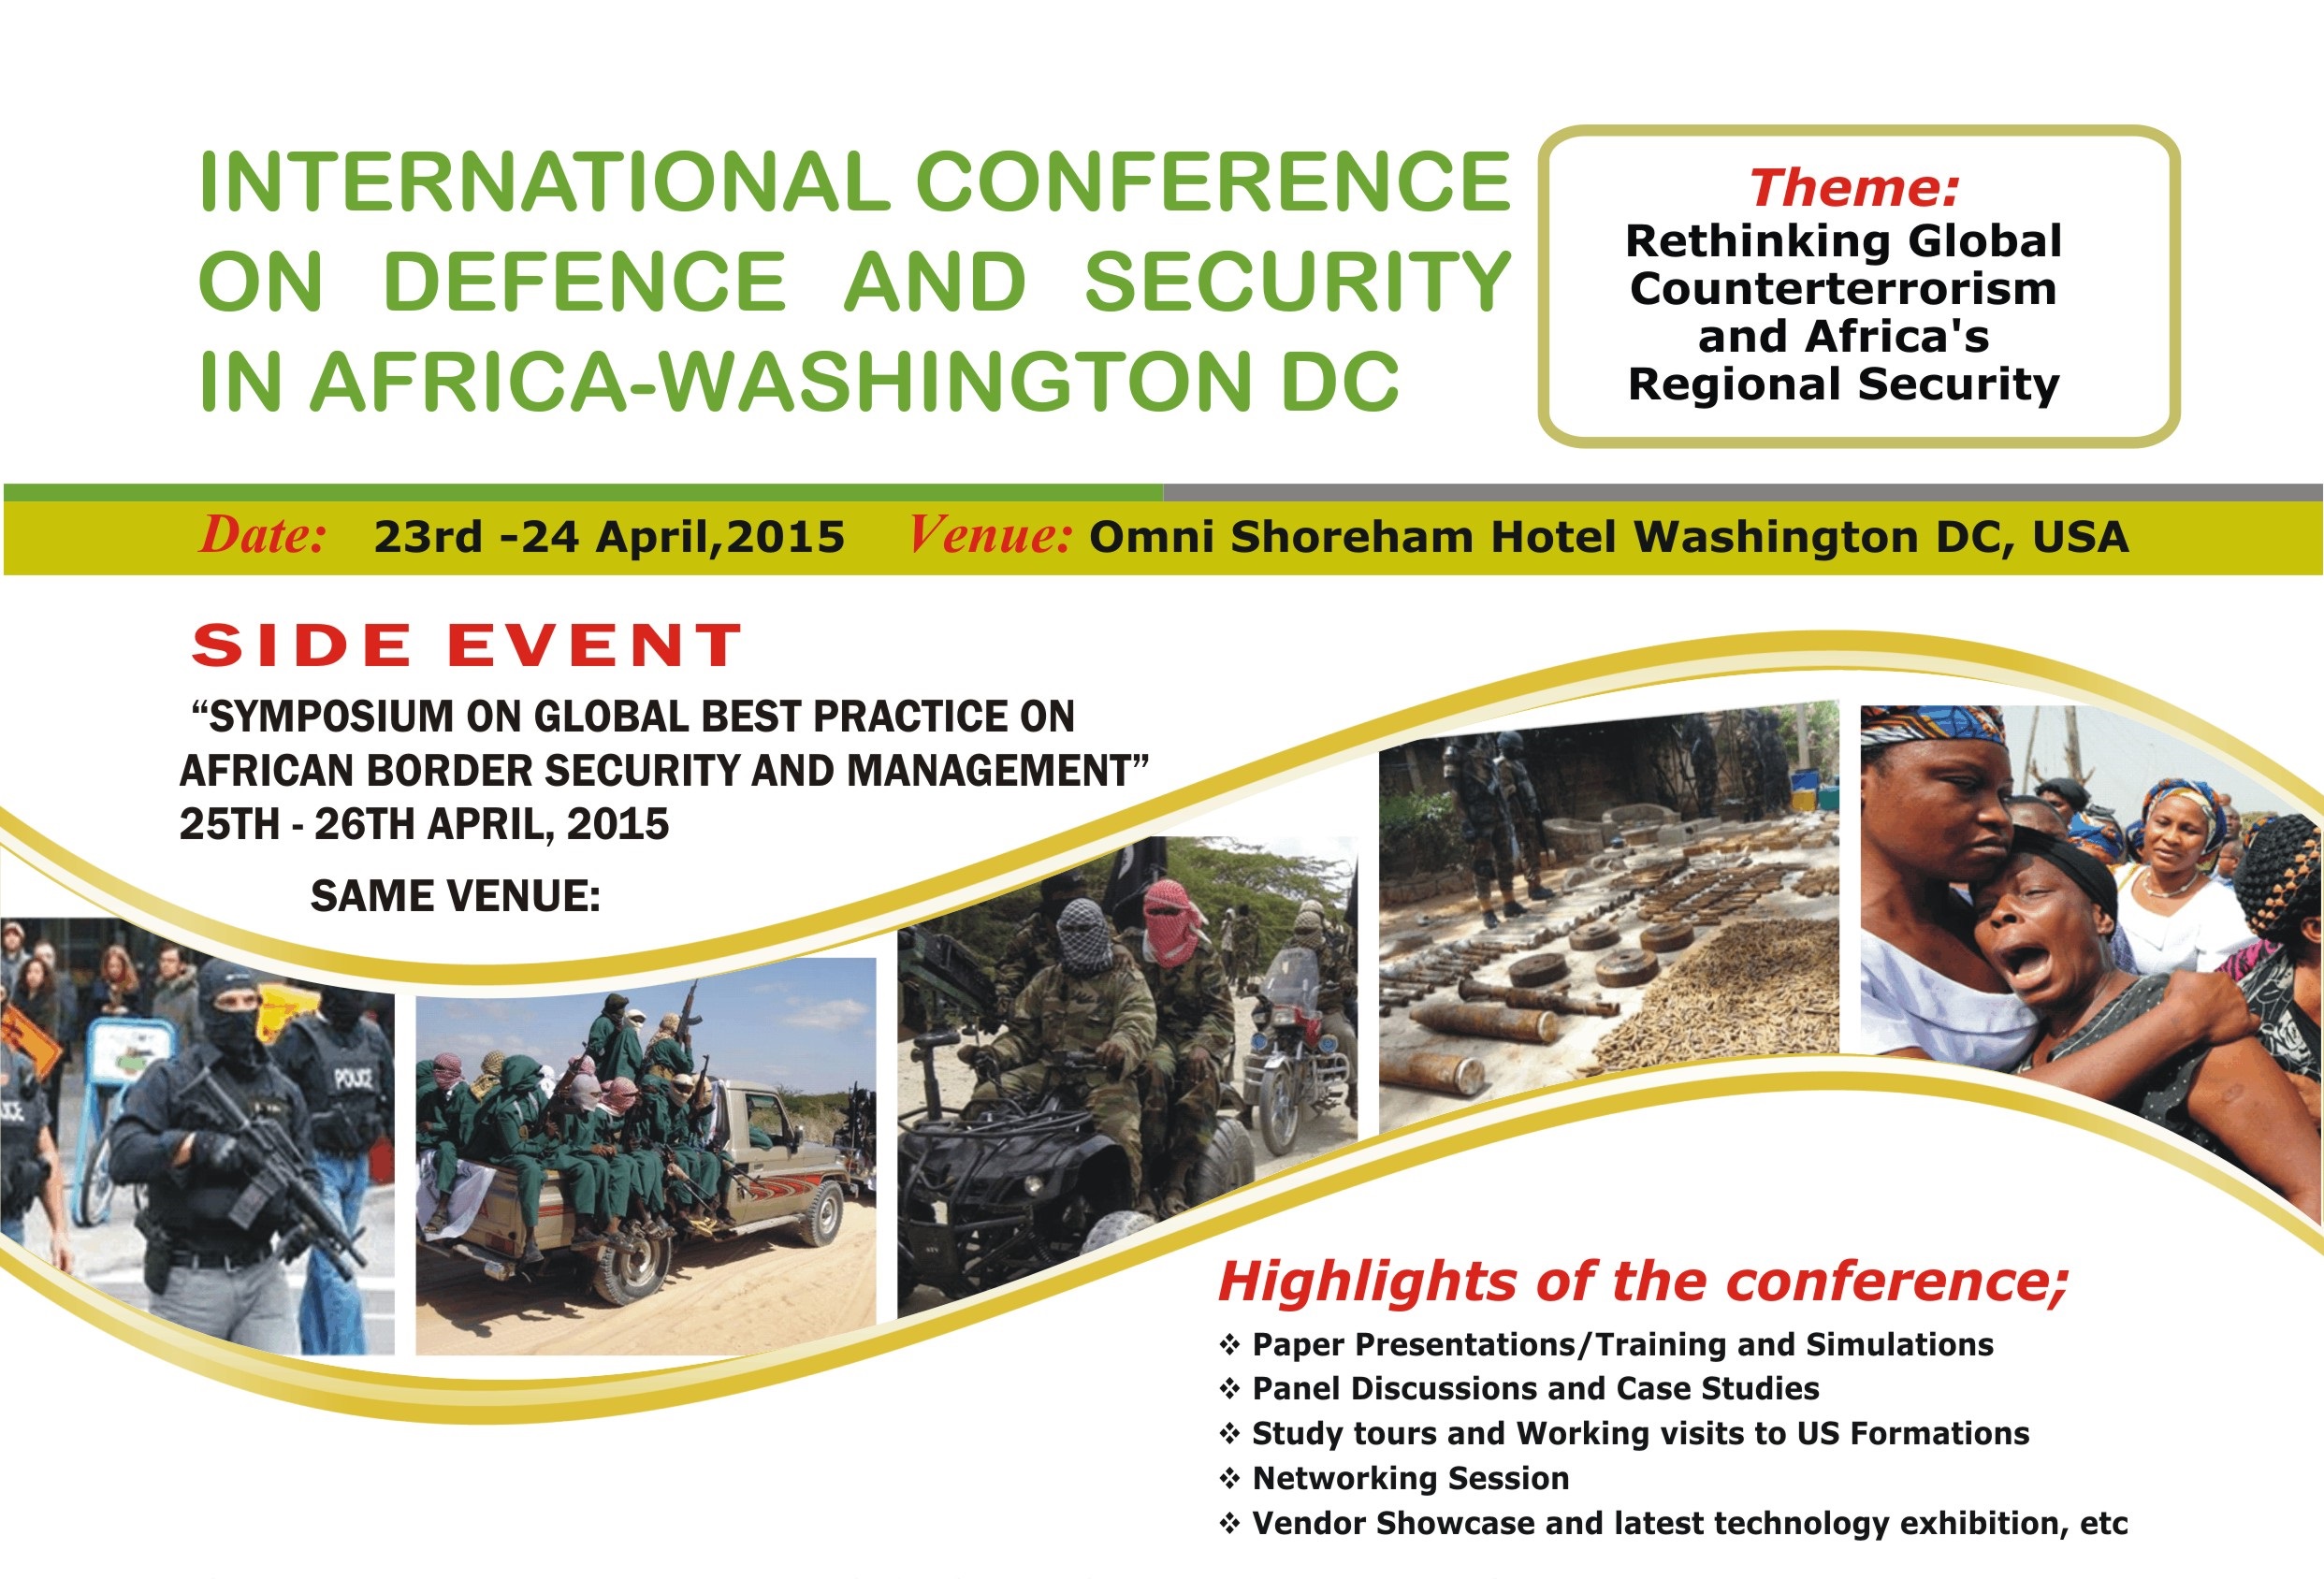 International Conference On Defence And Security in Africa-Washington DC